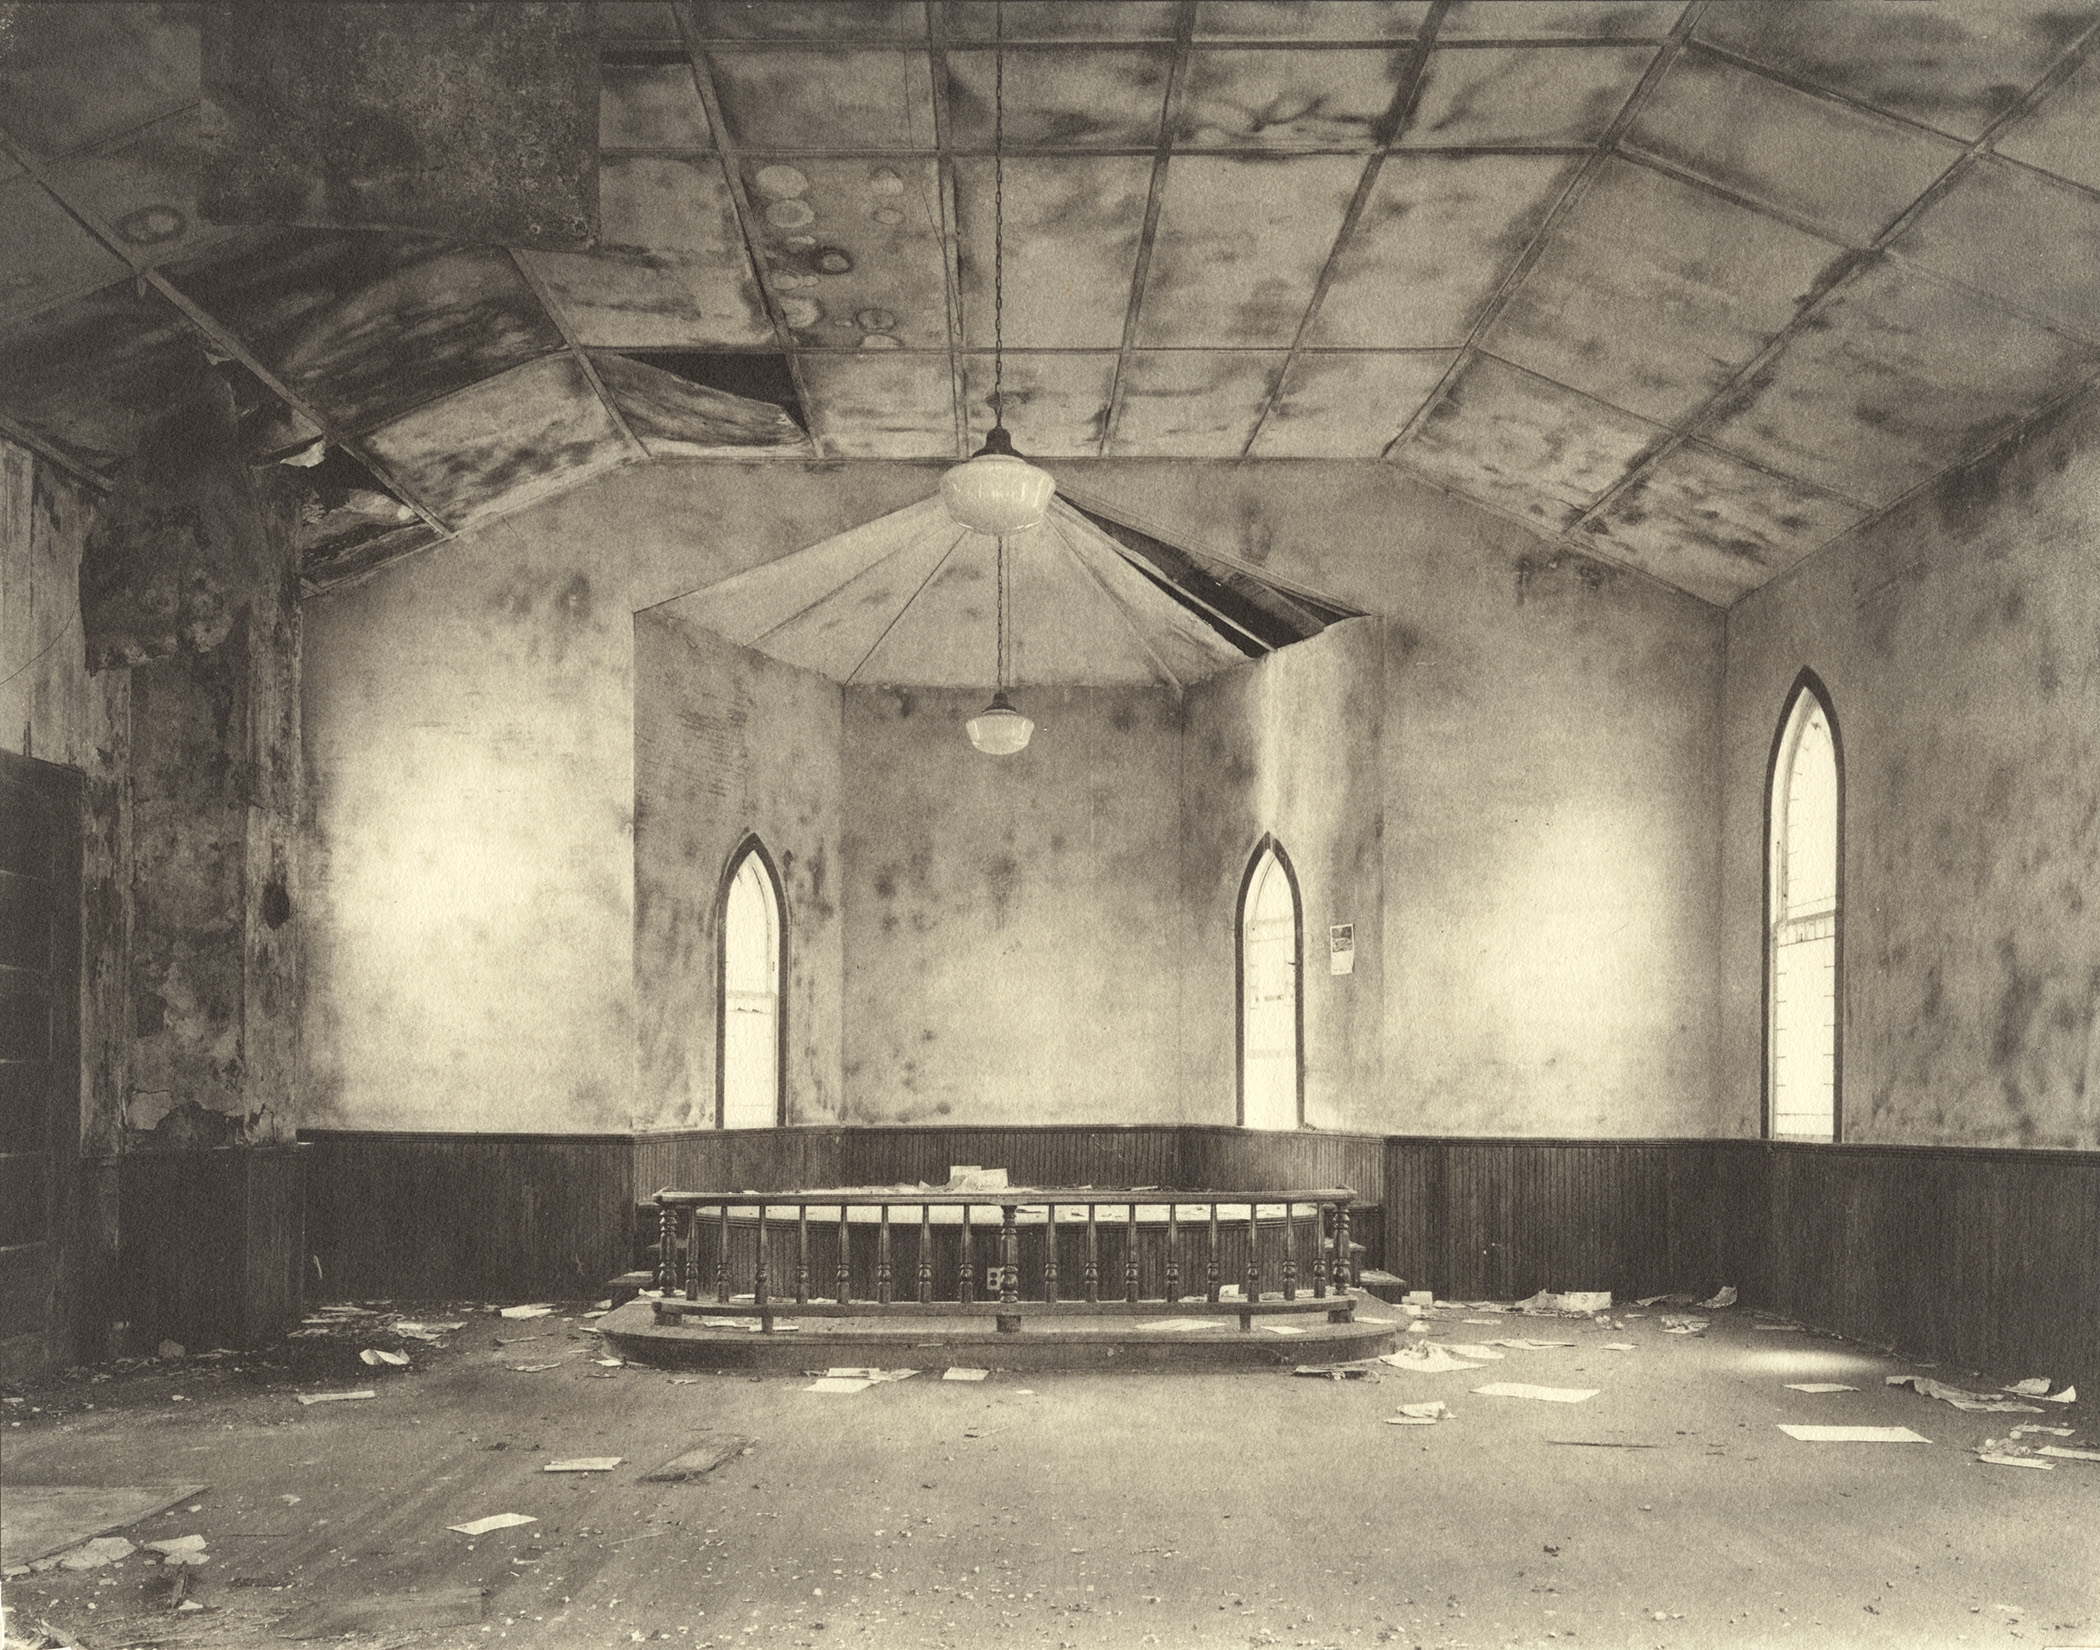 Steve Szabo, Interior, Christ M. E. Church, 1976, from the series Eastern Shore, platinum print. Collection 254 © Steve Szabo, used with permission